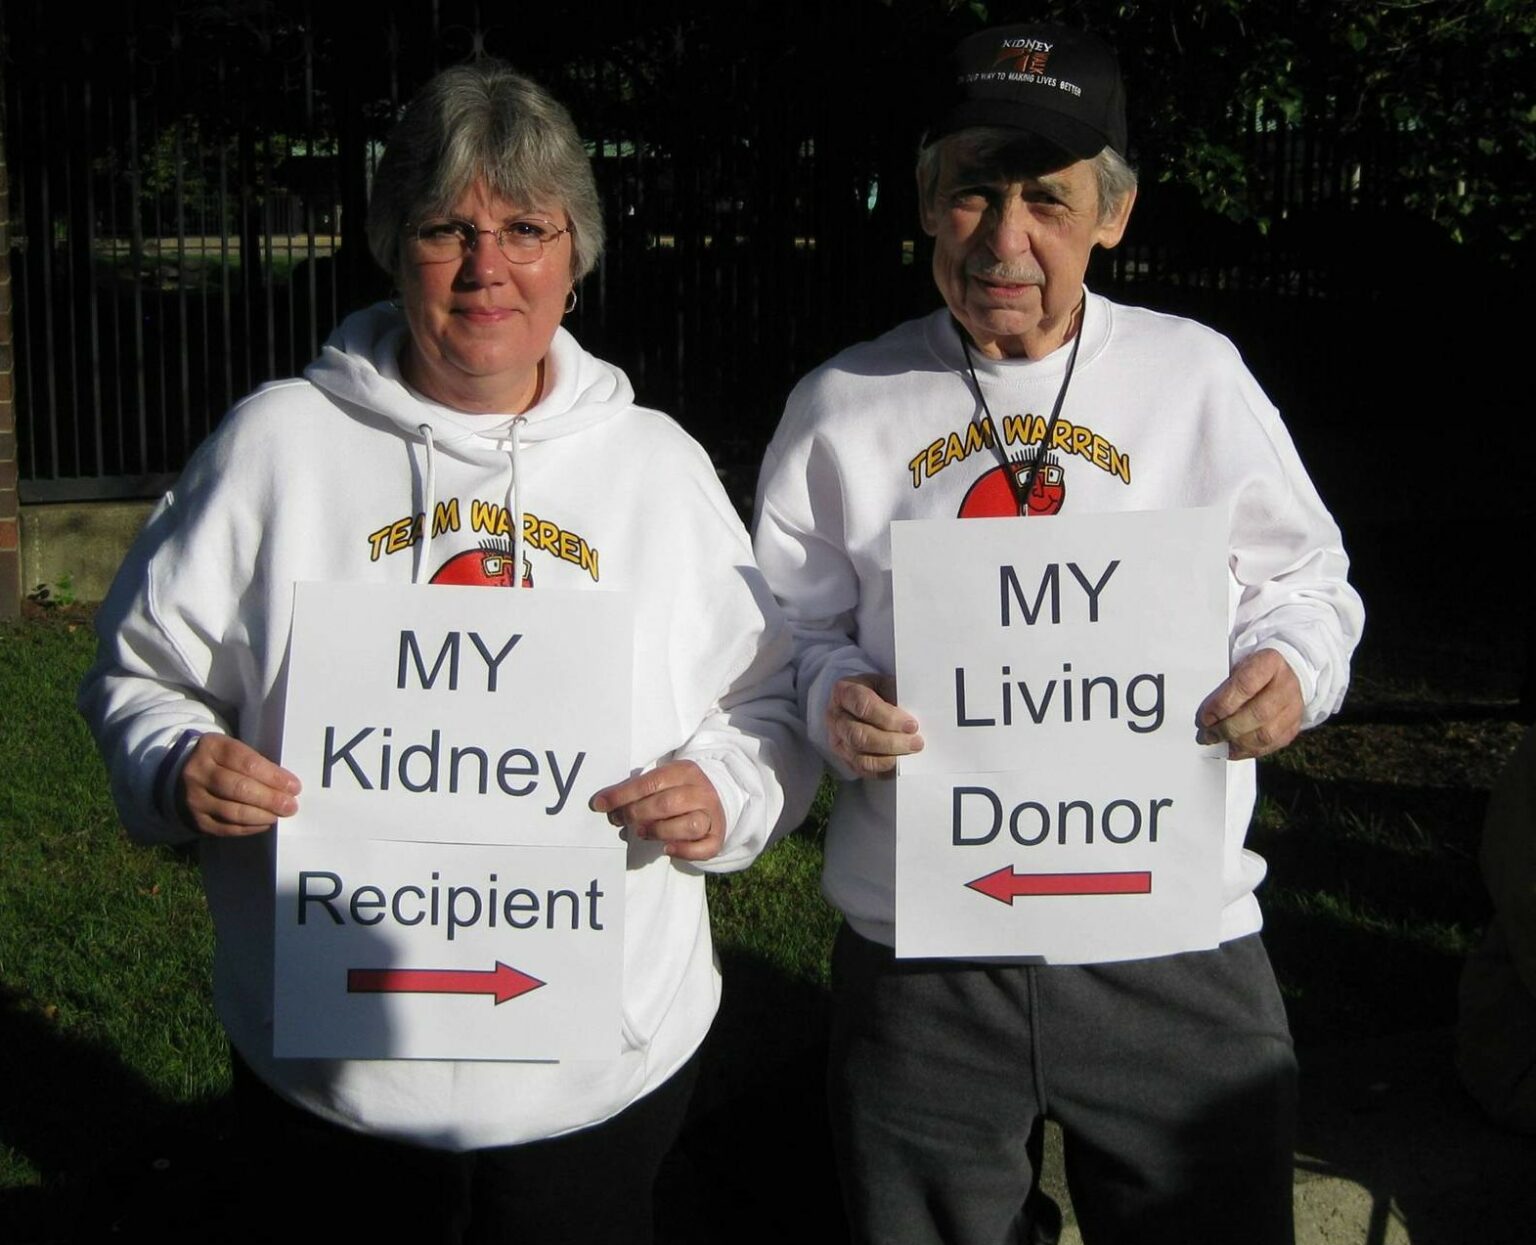 Woman holding sign saying "My Kidney Recipient" with arrow pointing at man, who is holding sign with arrow pointing at her saying "My Living Donor"